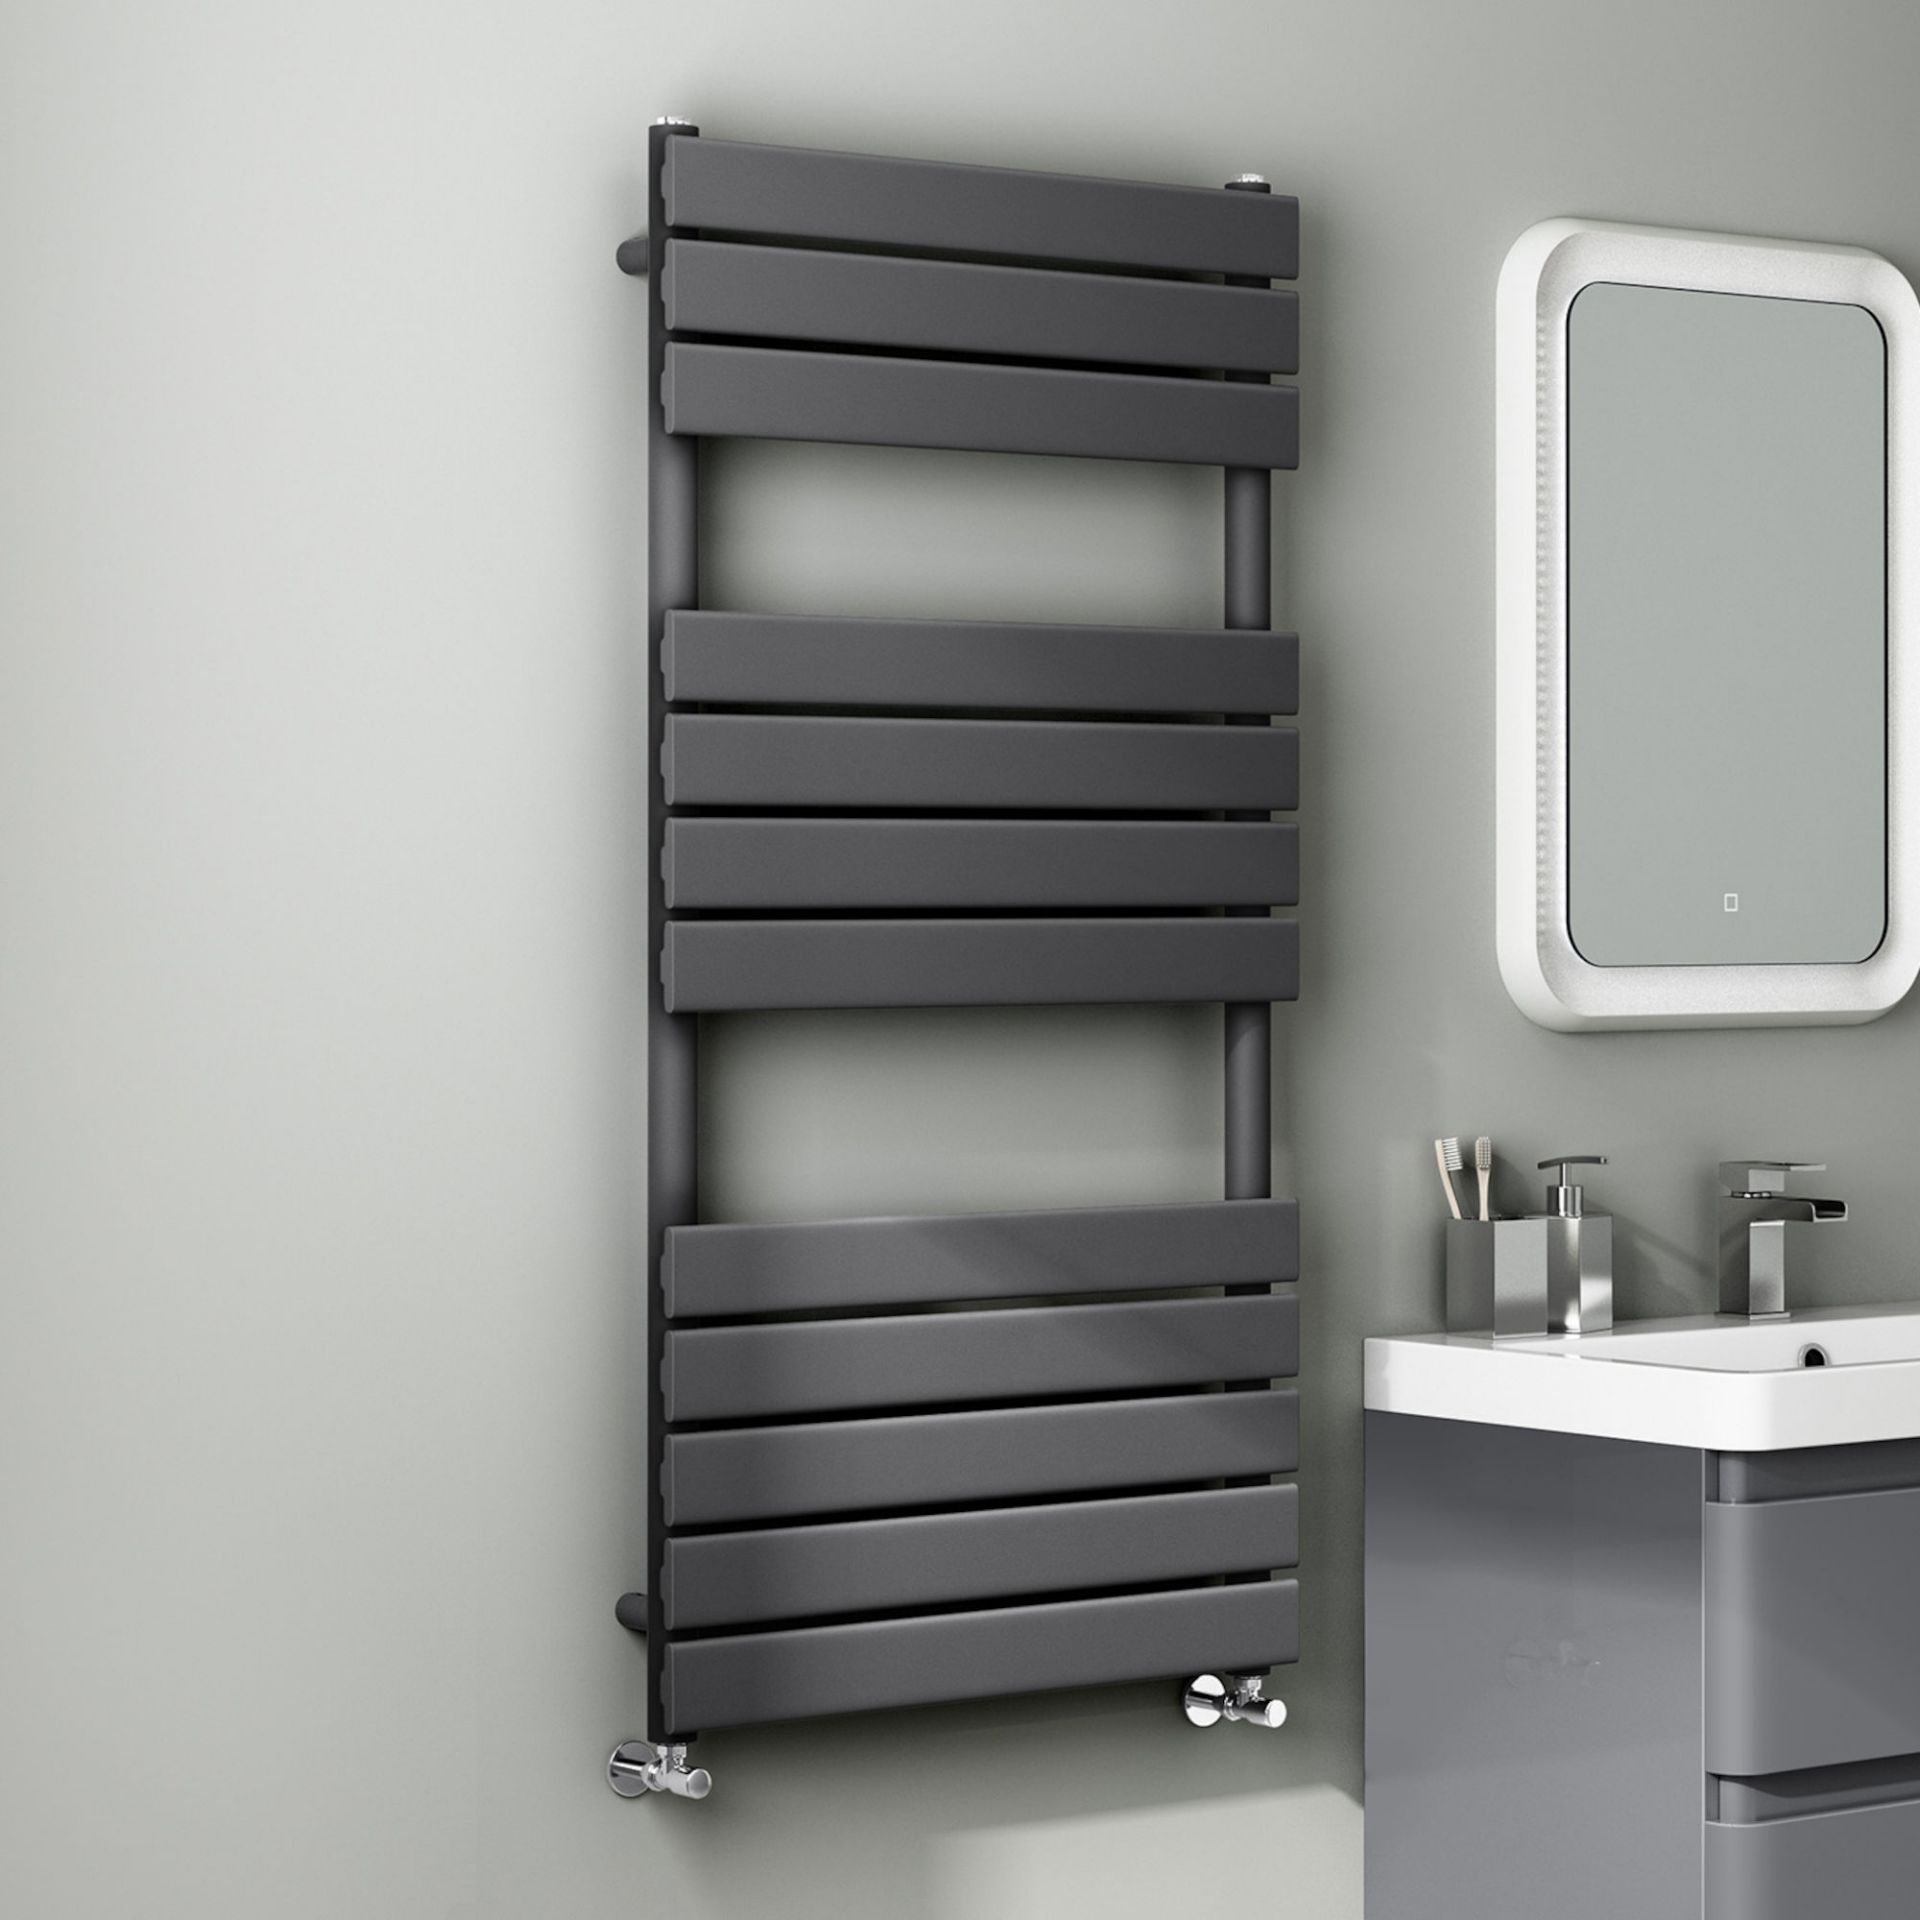 (TP11) 1200x600mm Anthracite Flat Panel Ladder Towel Radiator. Made with low carbon steel,